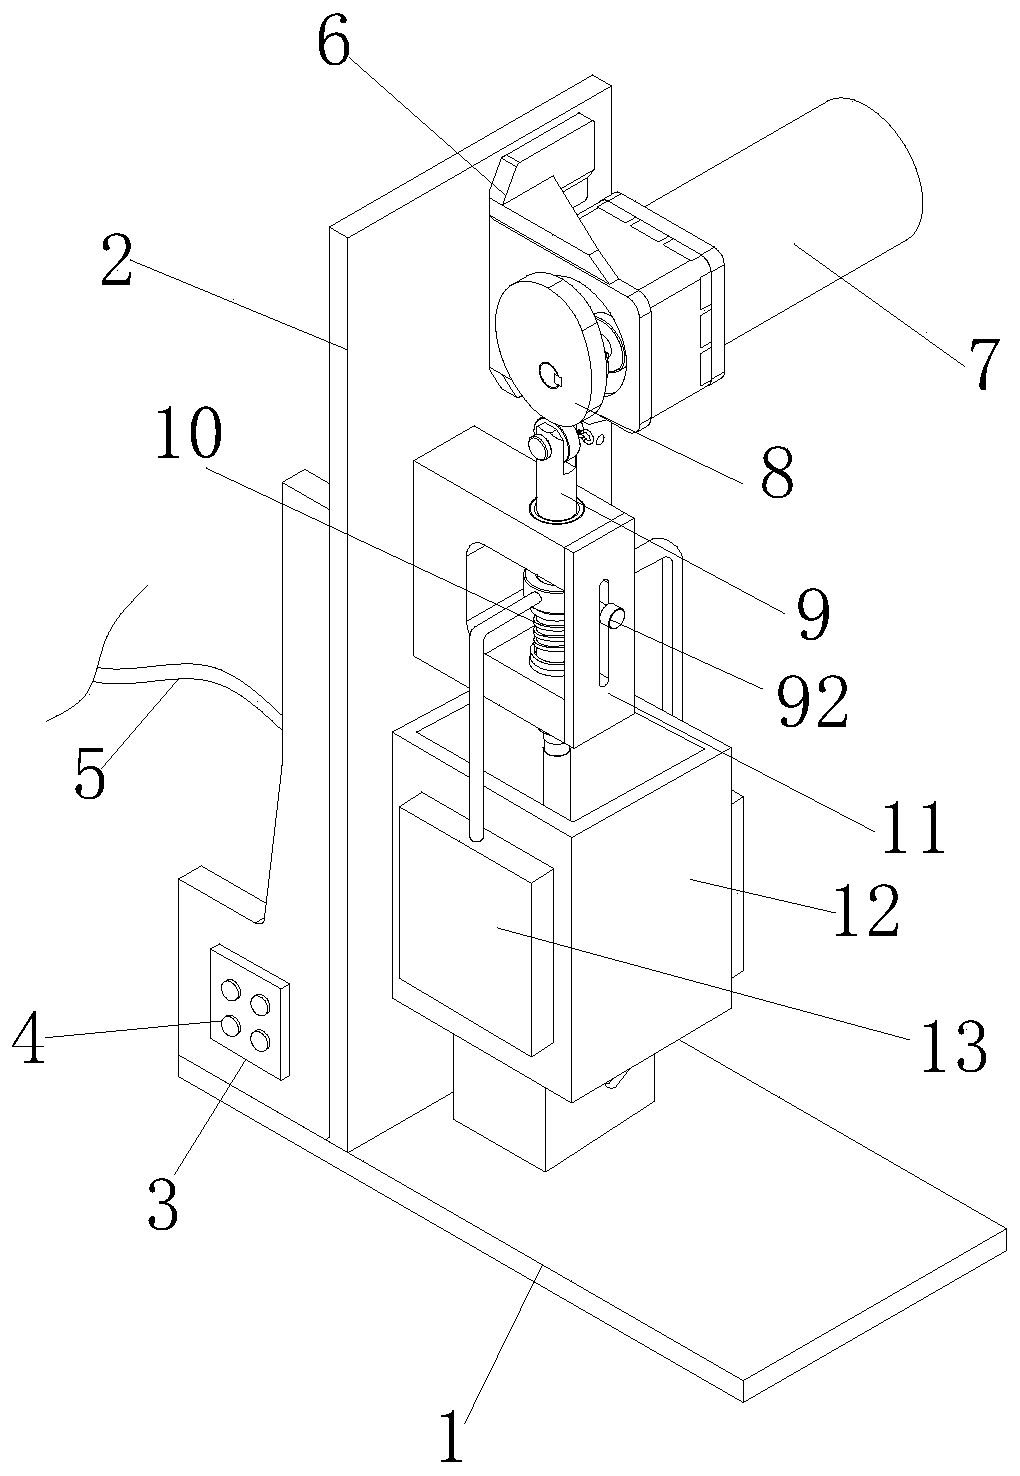 Mashing device of raw material extraction equipment for cosmetic production